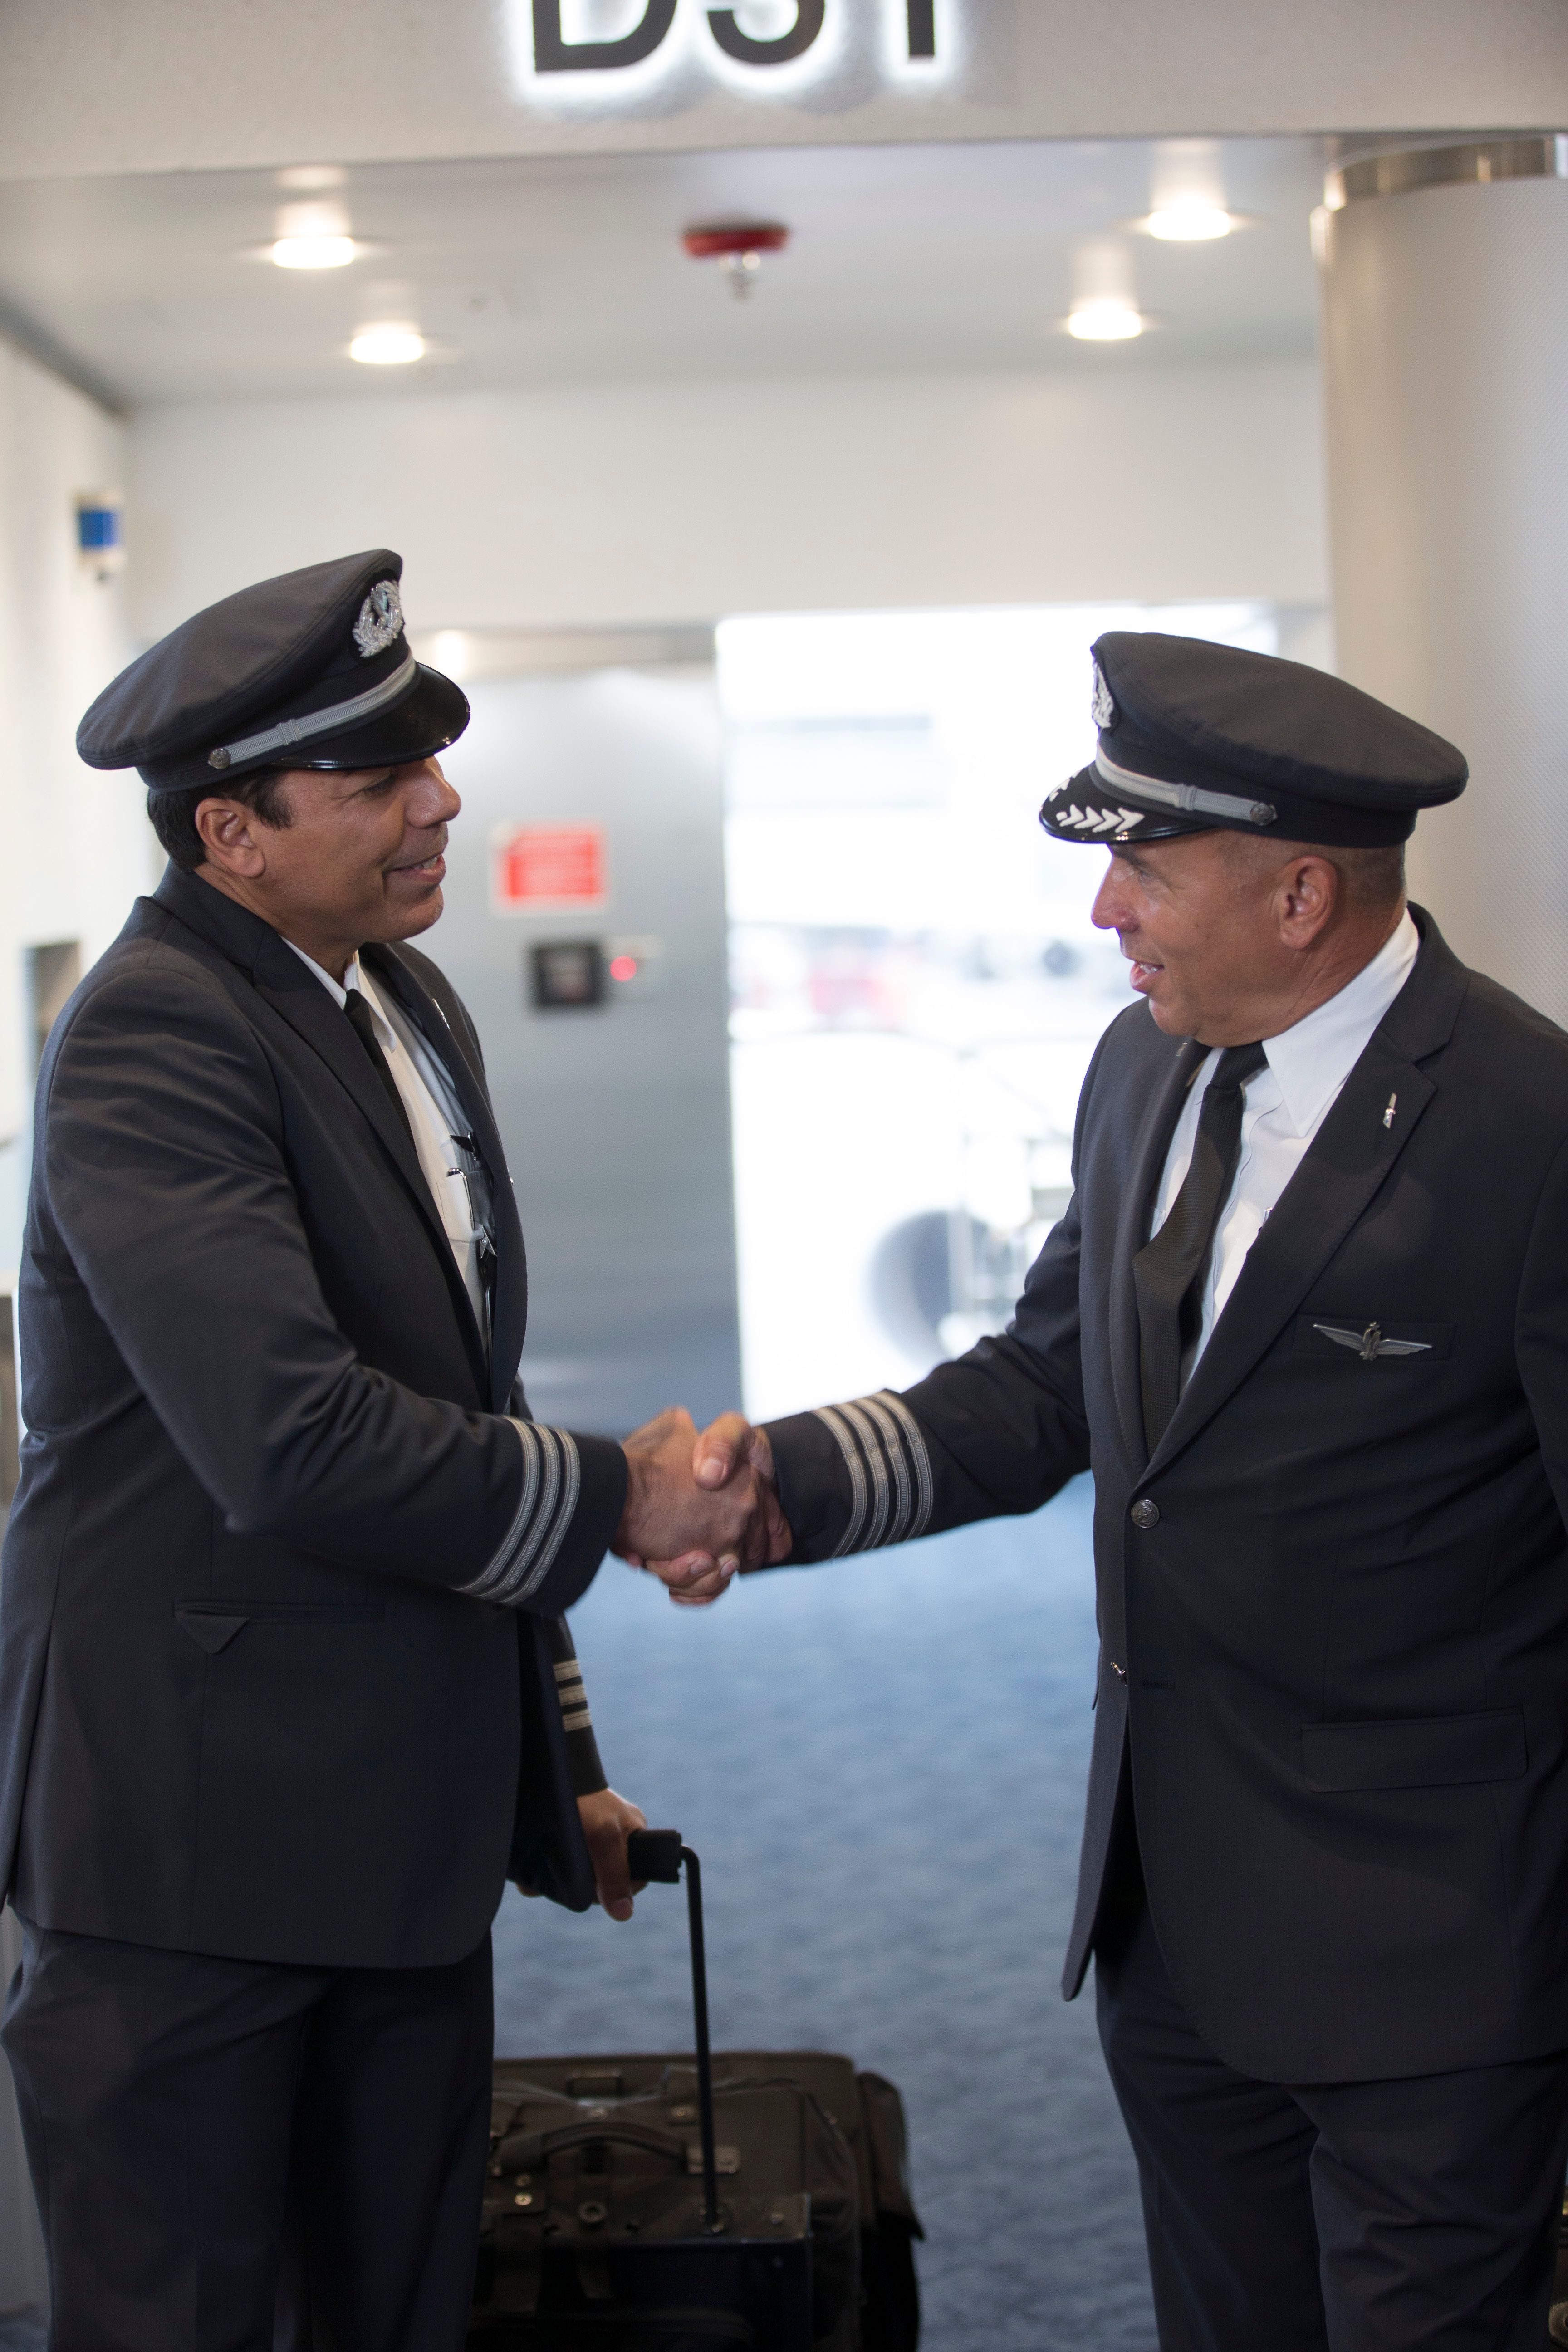 Pilots-pilots-shaking-hands-at-gate - American Airlines